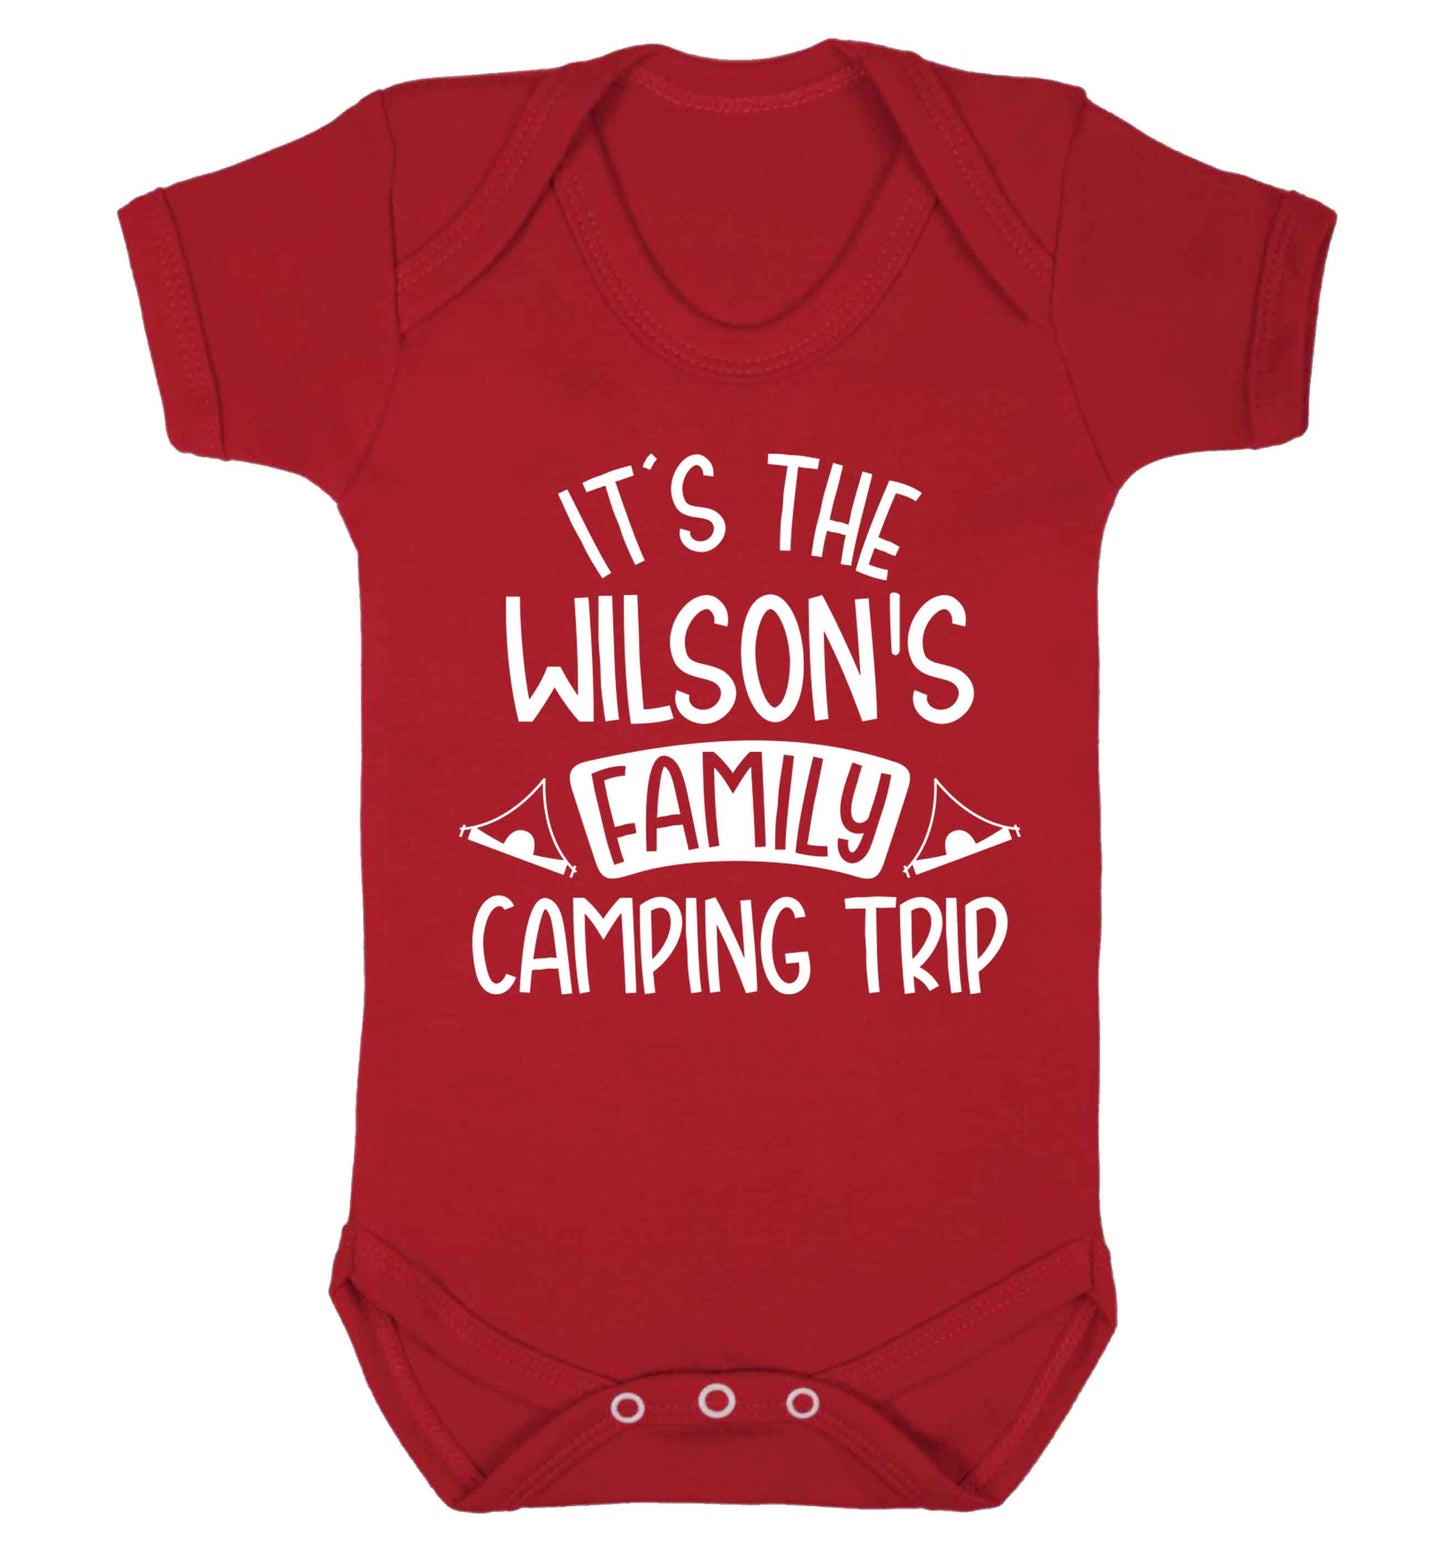 It's the Wilson's family camping trip personalised Baby Vest red 18-24 months